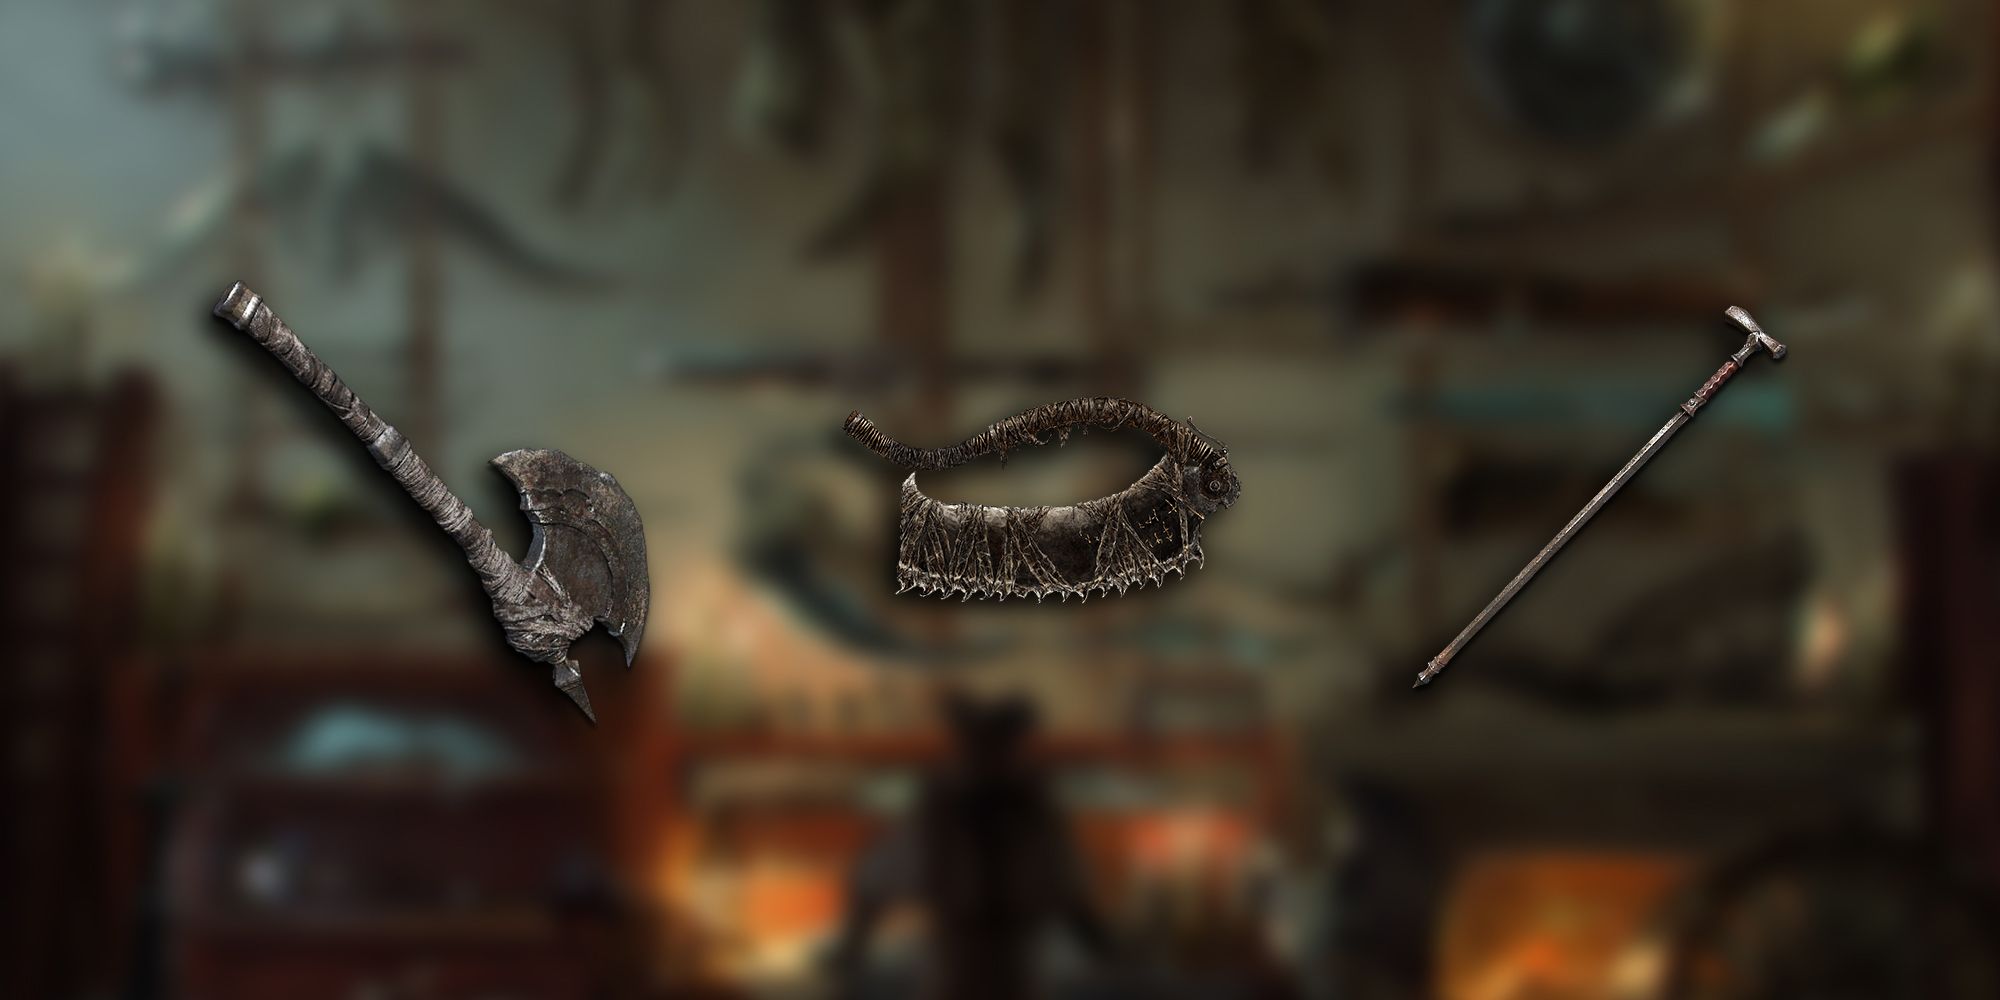 Bloodborne - All Three Starter Weapon PNGs Overlaid On Image Of The Wall Of Weapons In Hunter's Dream